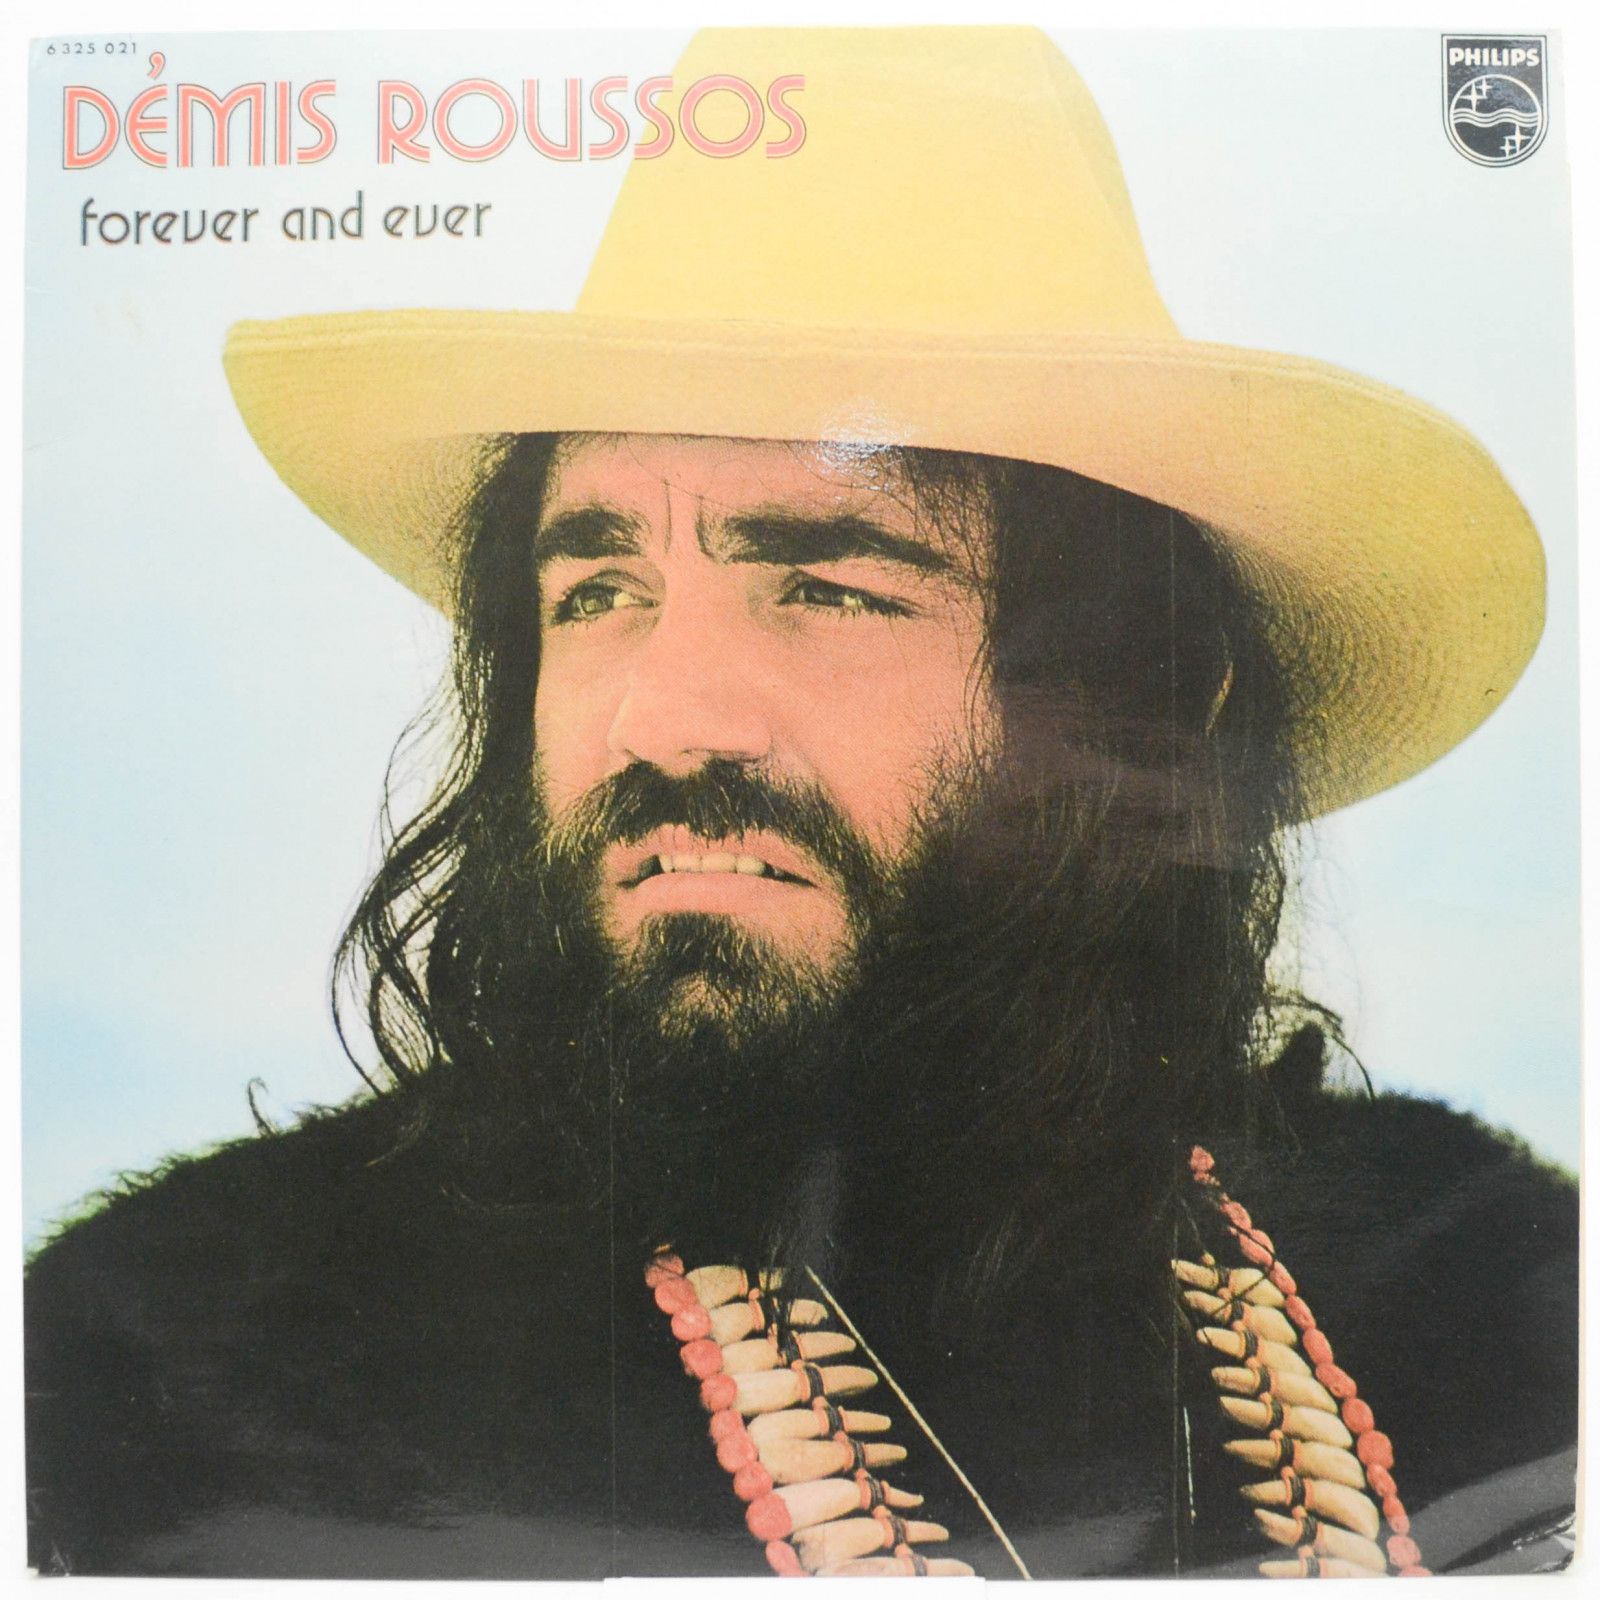 Démis Roussos — Forever And Ever, 1973